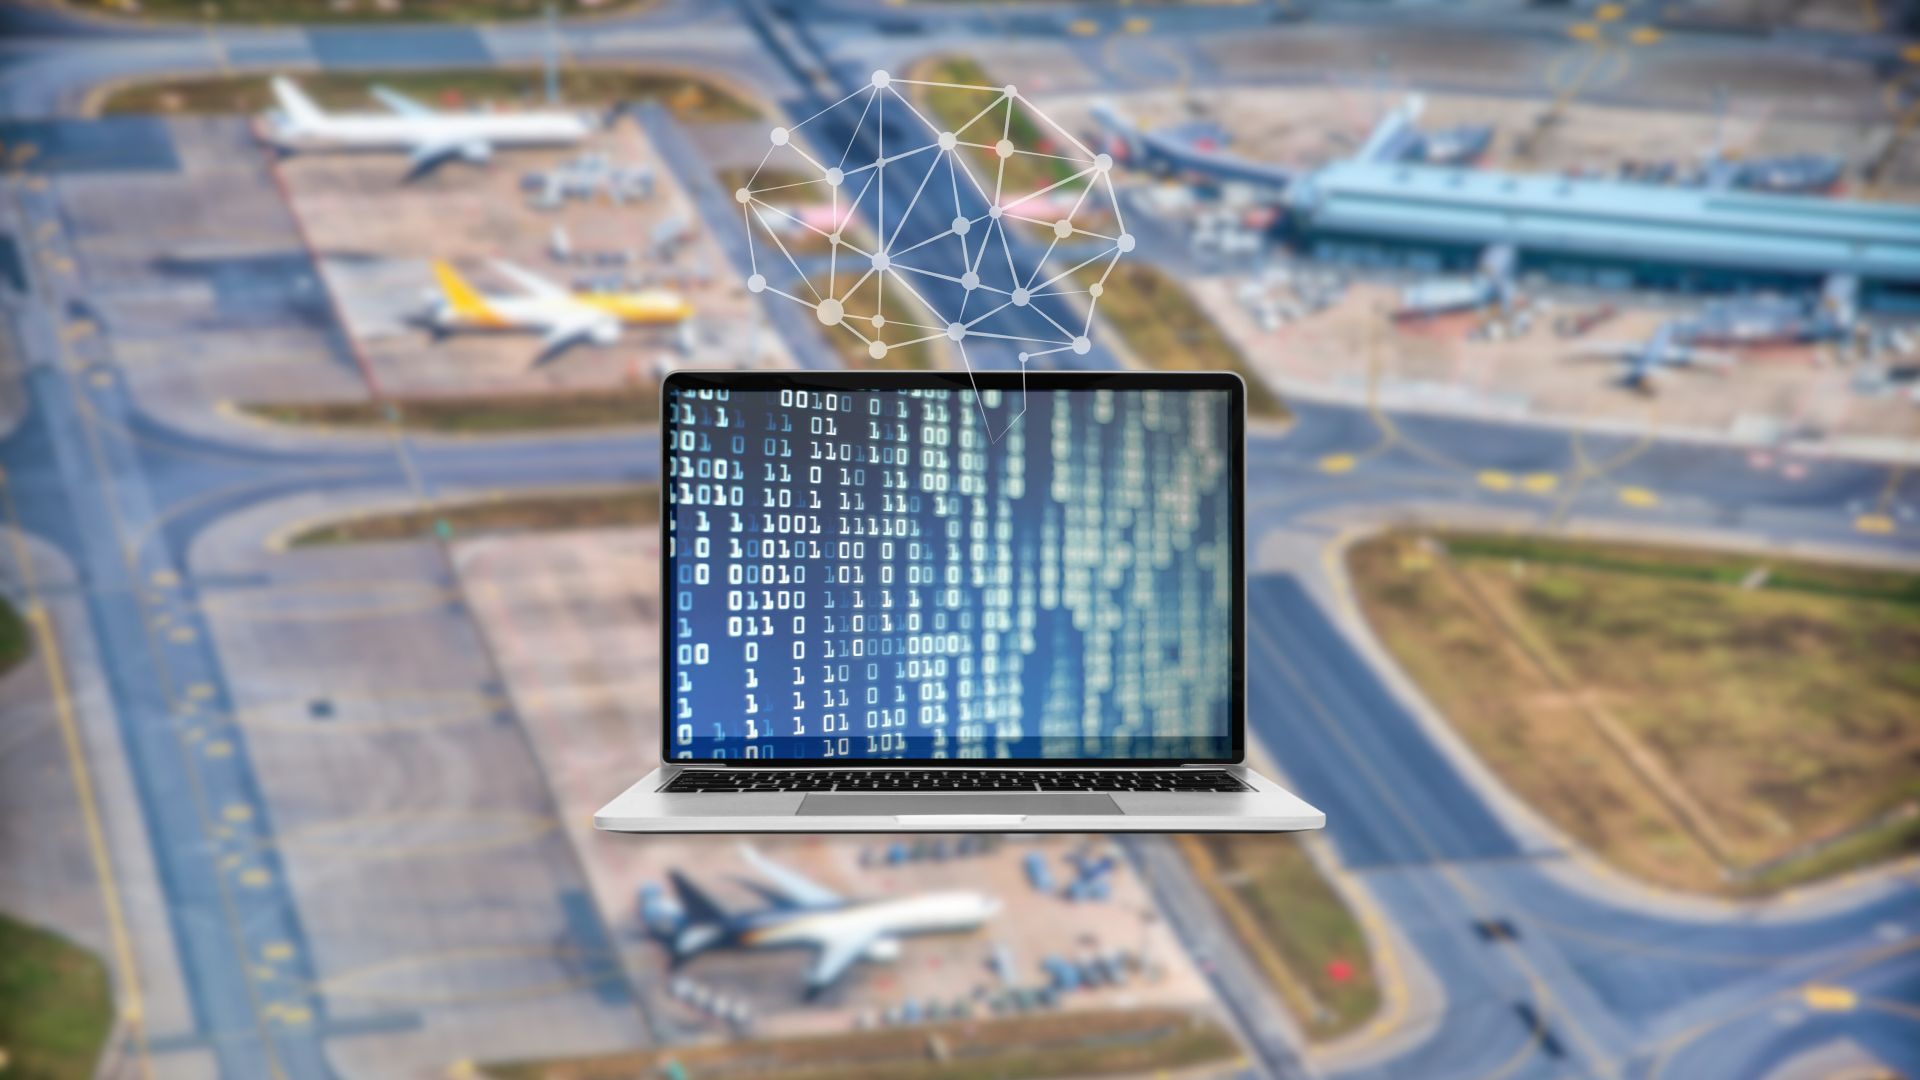 What is cloud technology at the airport?
